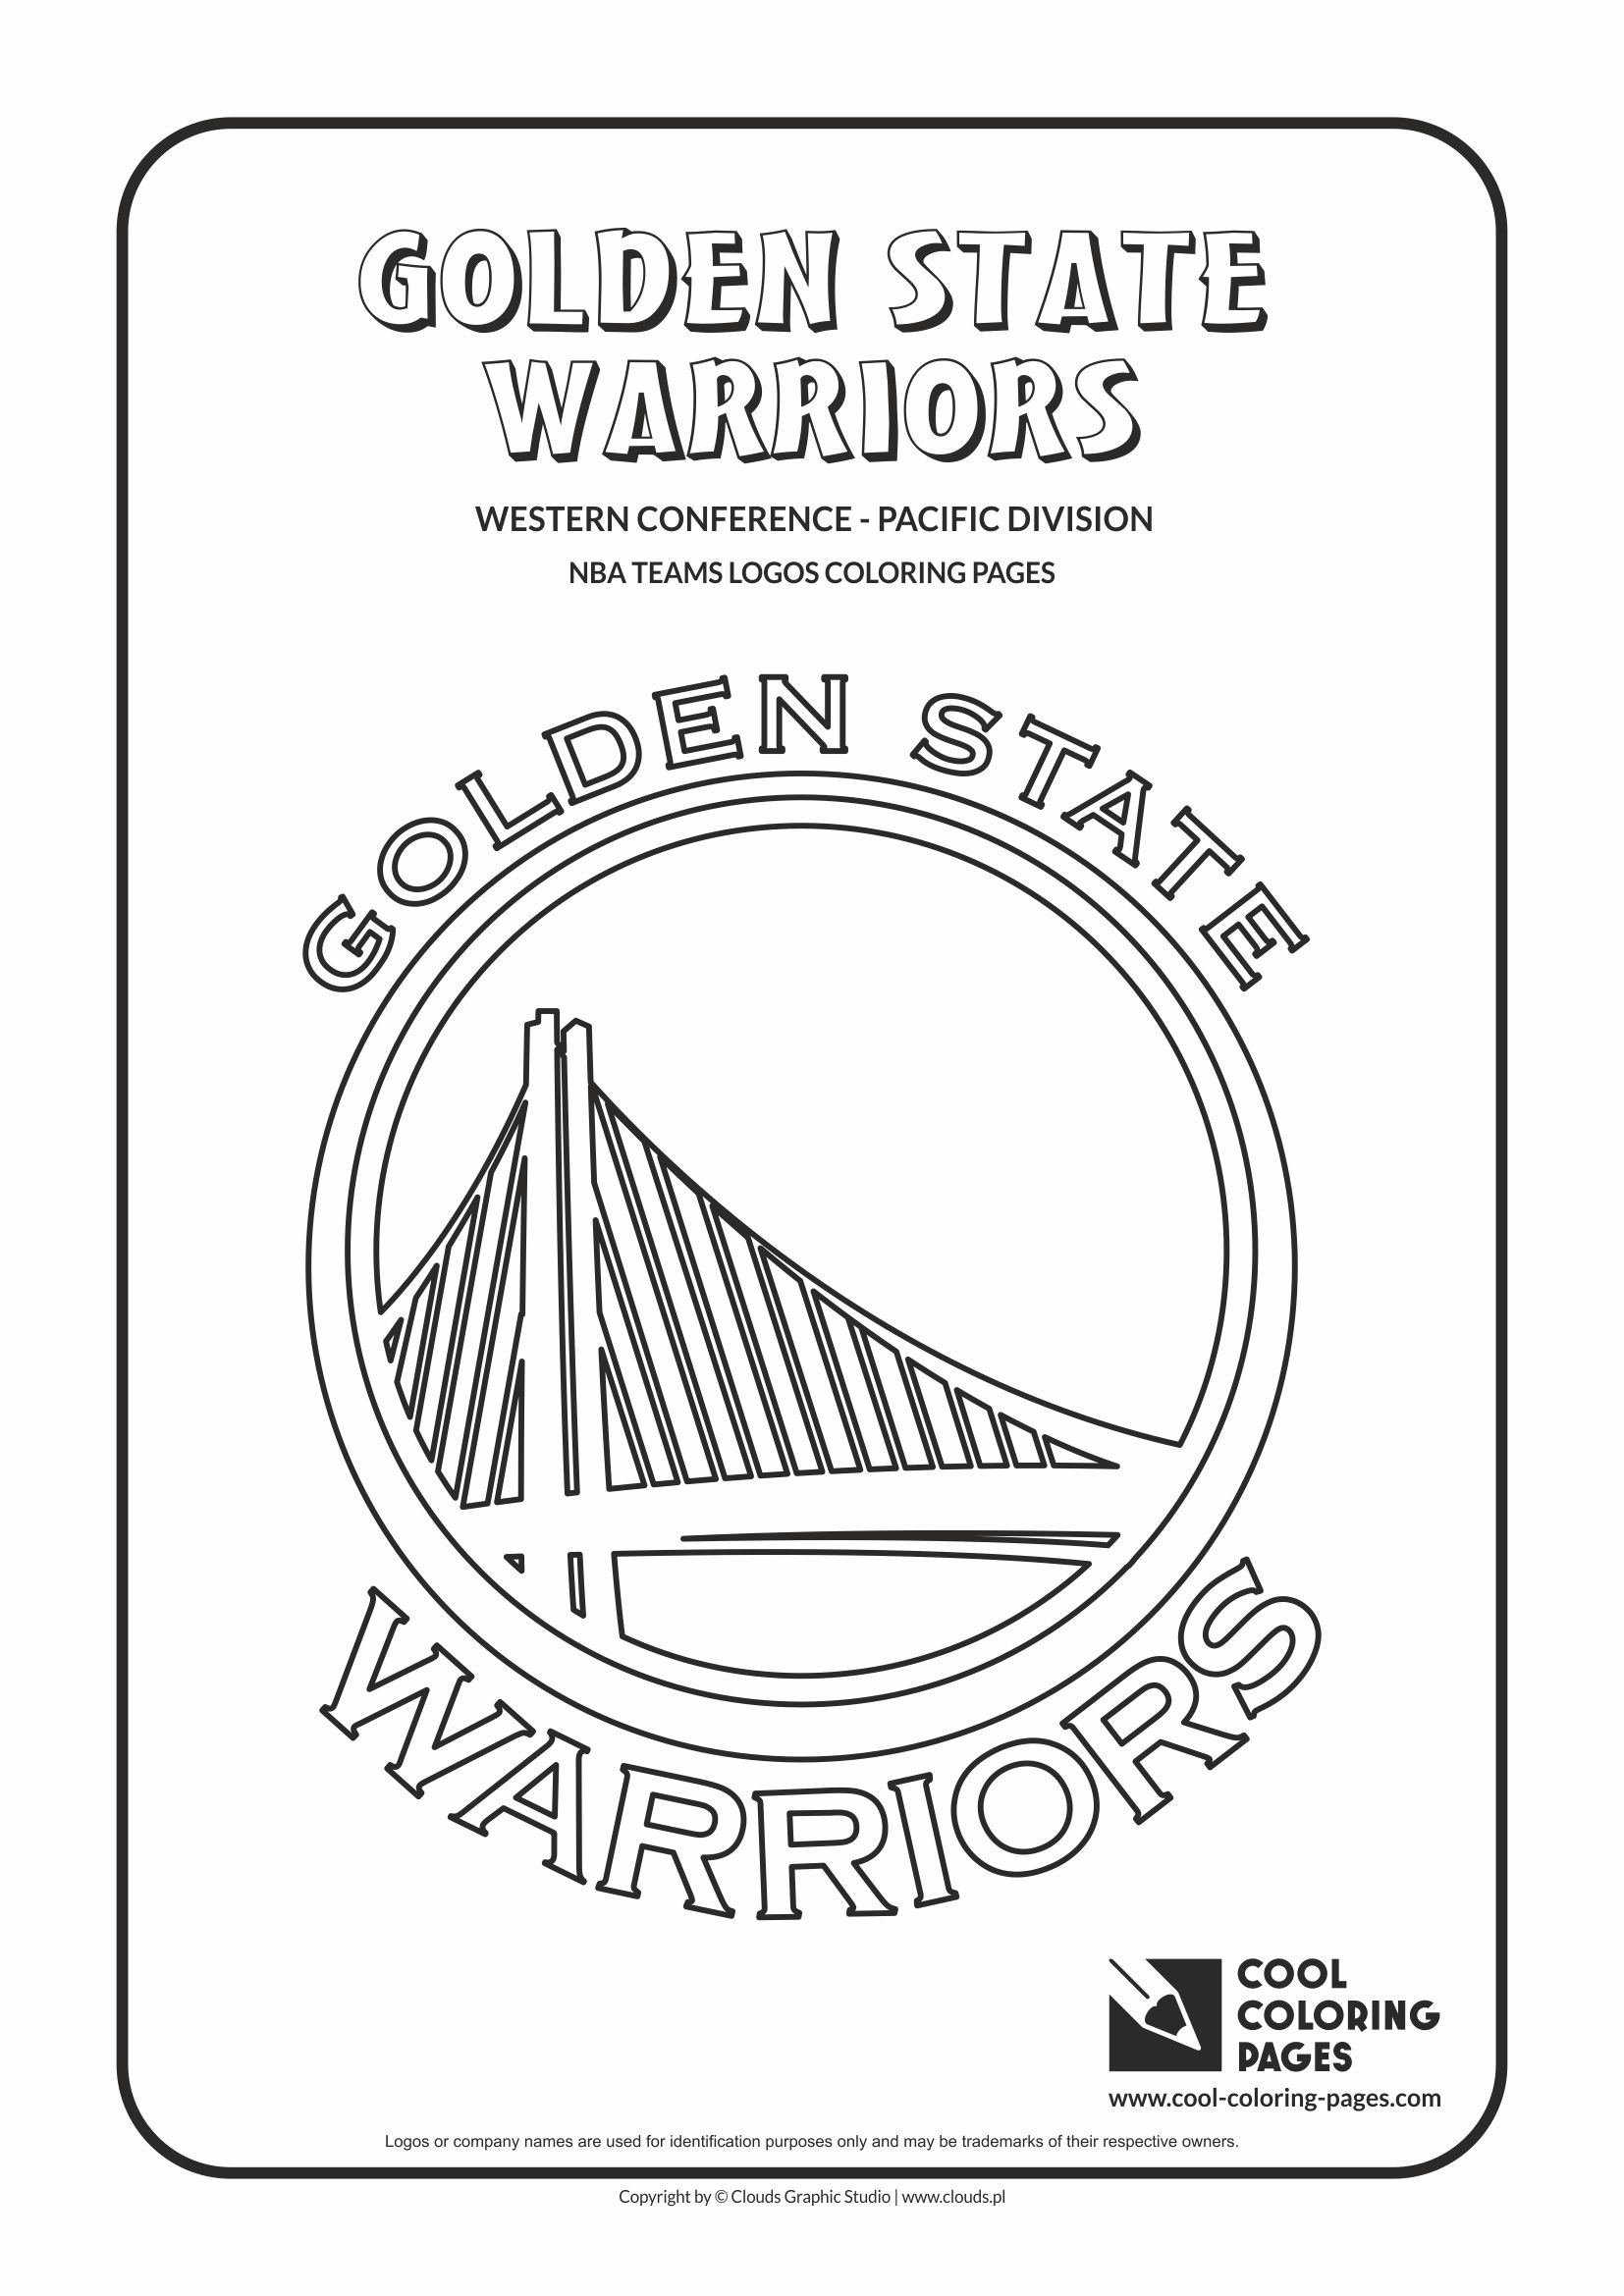 Cool Coloring Pages Golden State Warriors - NBA basketball teams logos